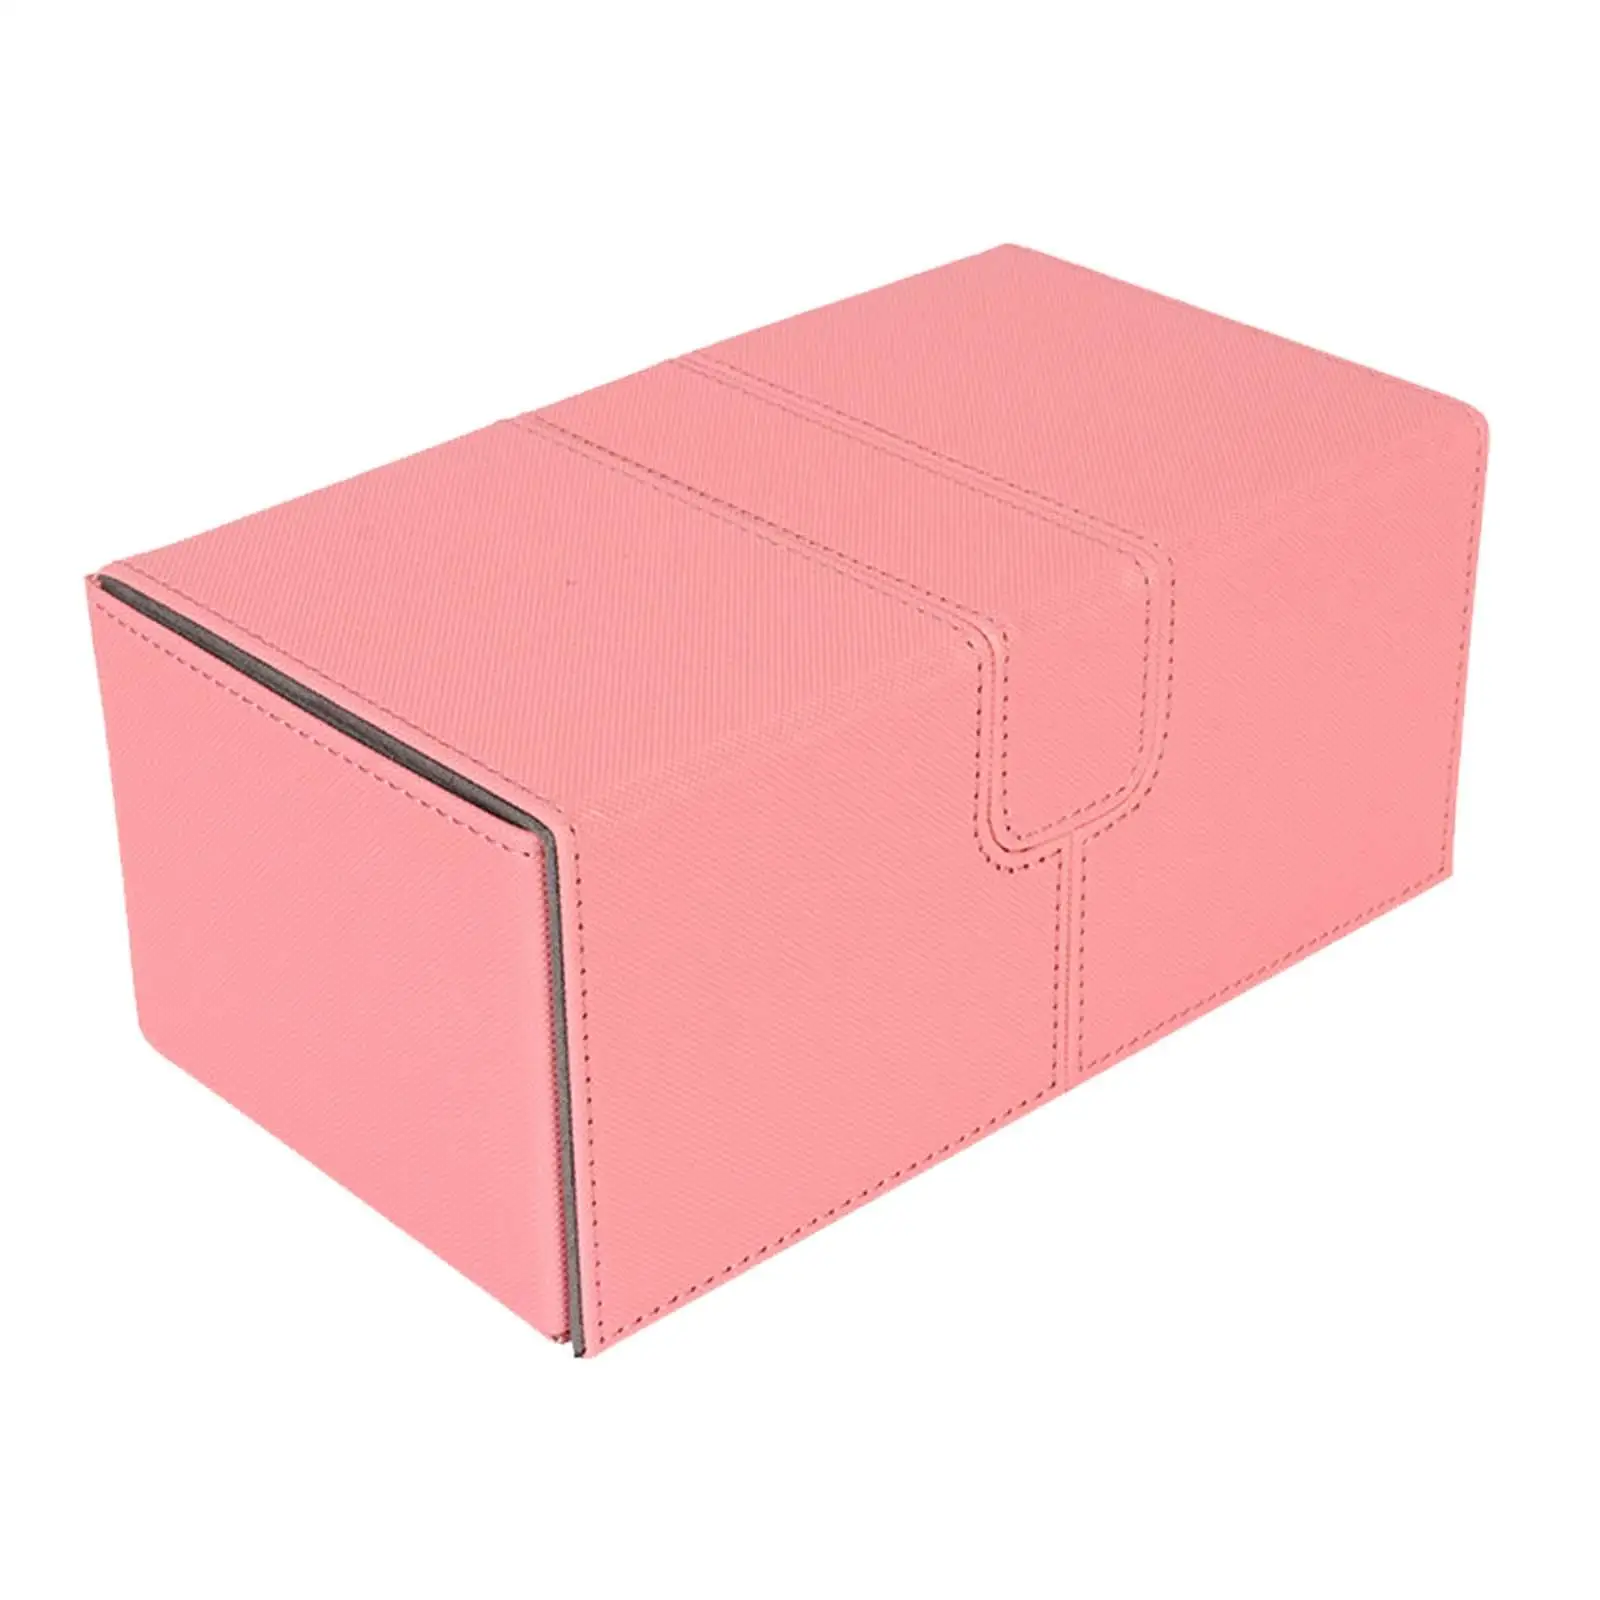 Trading Card Deck Box Case Storage Card Holder for TCG Hobbies Game Card